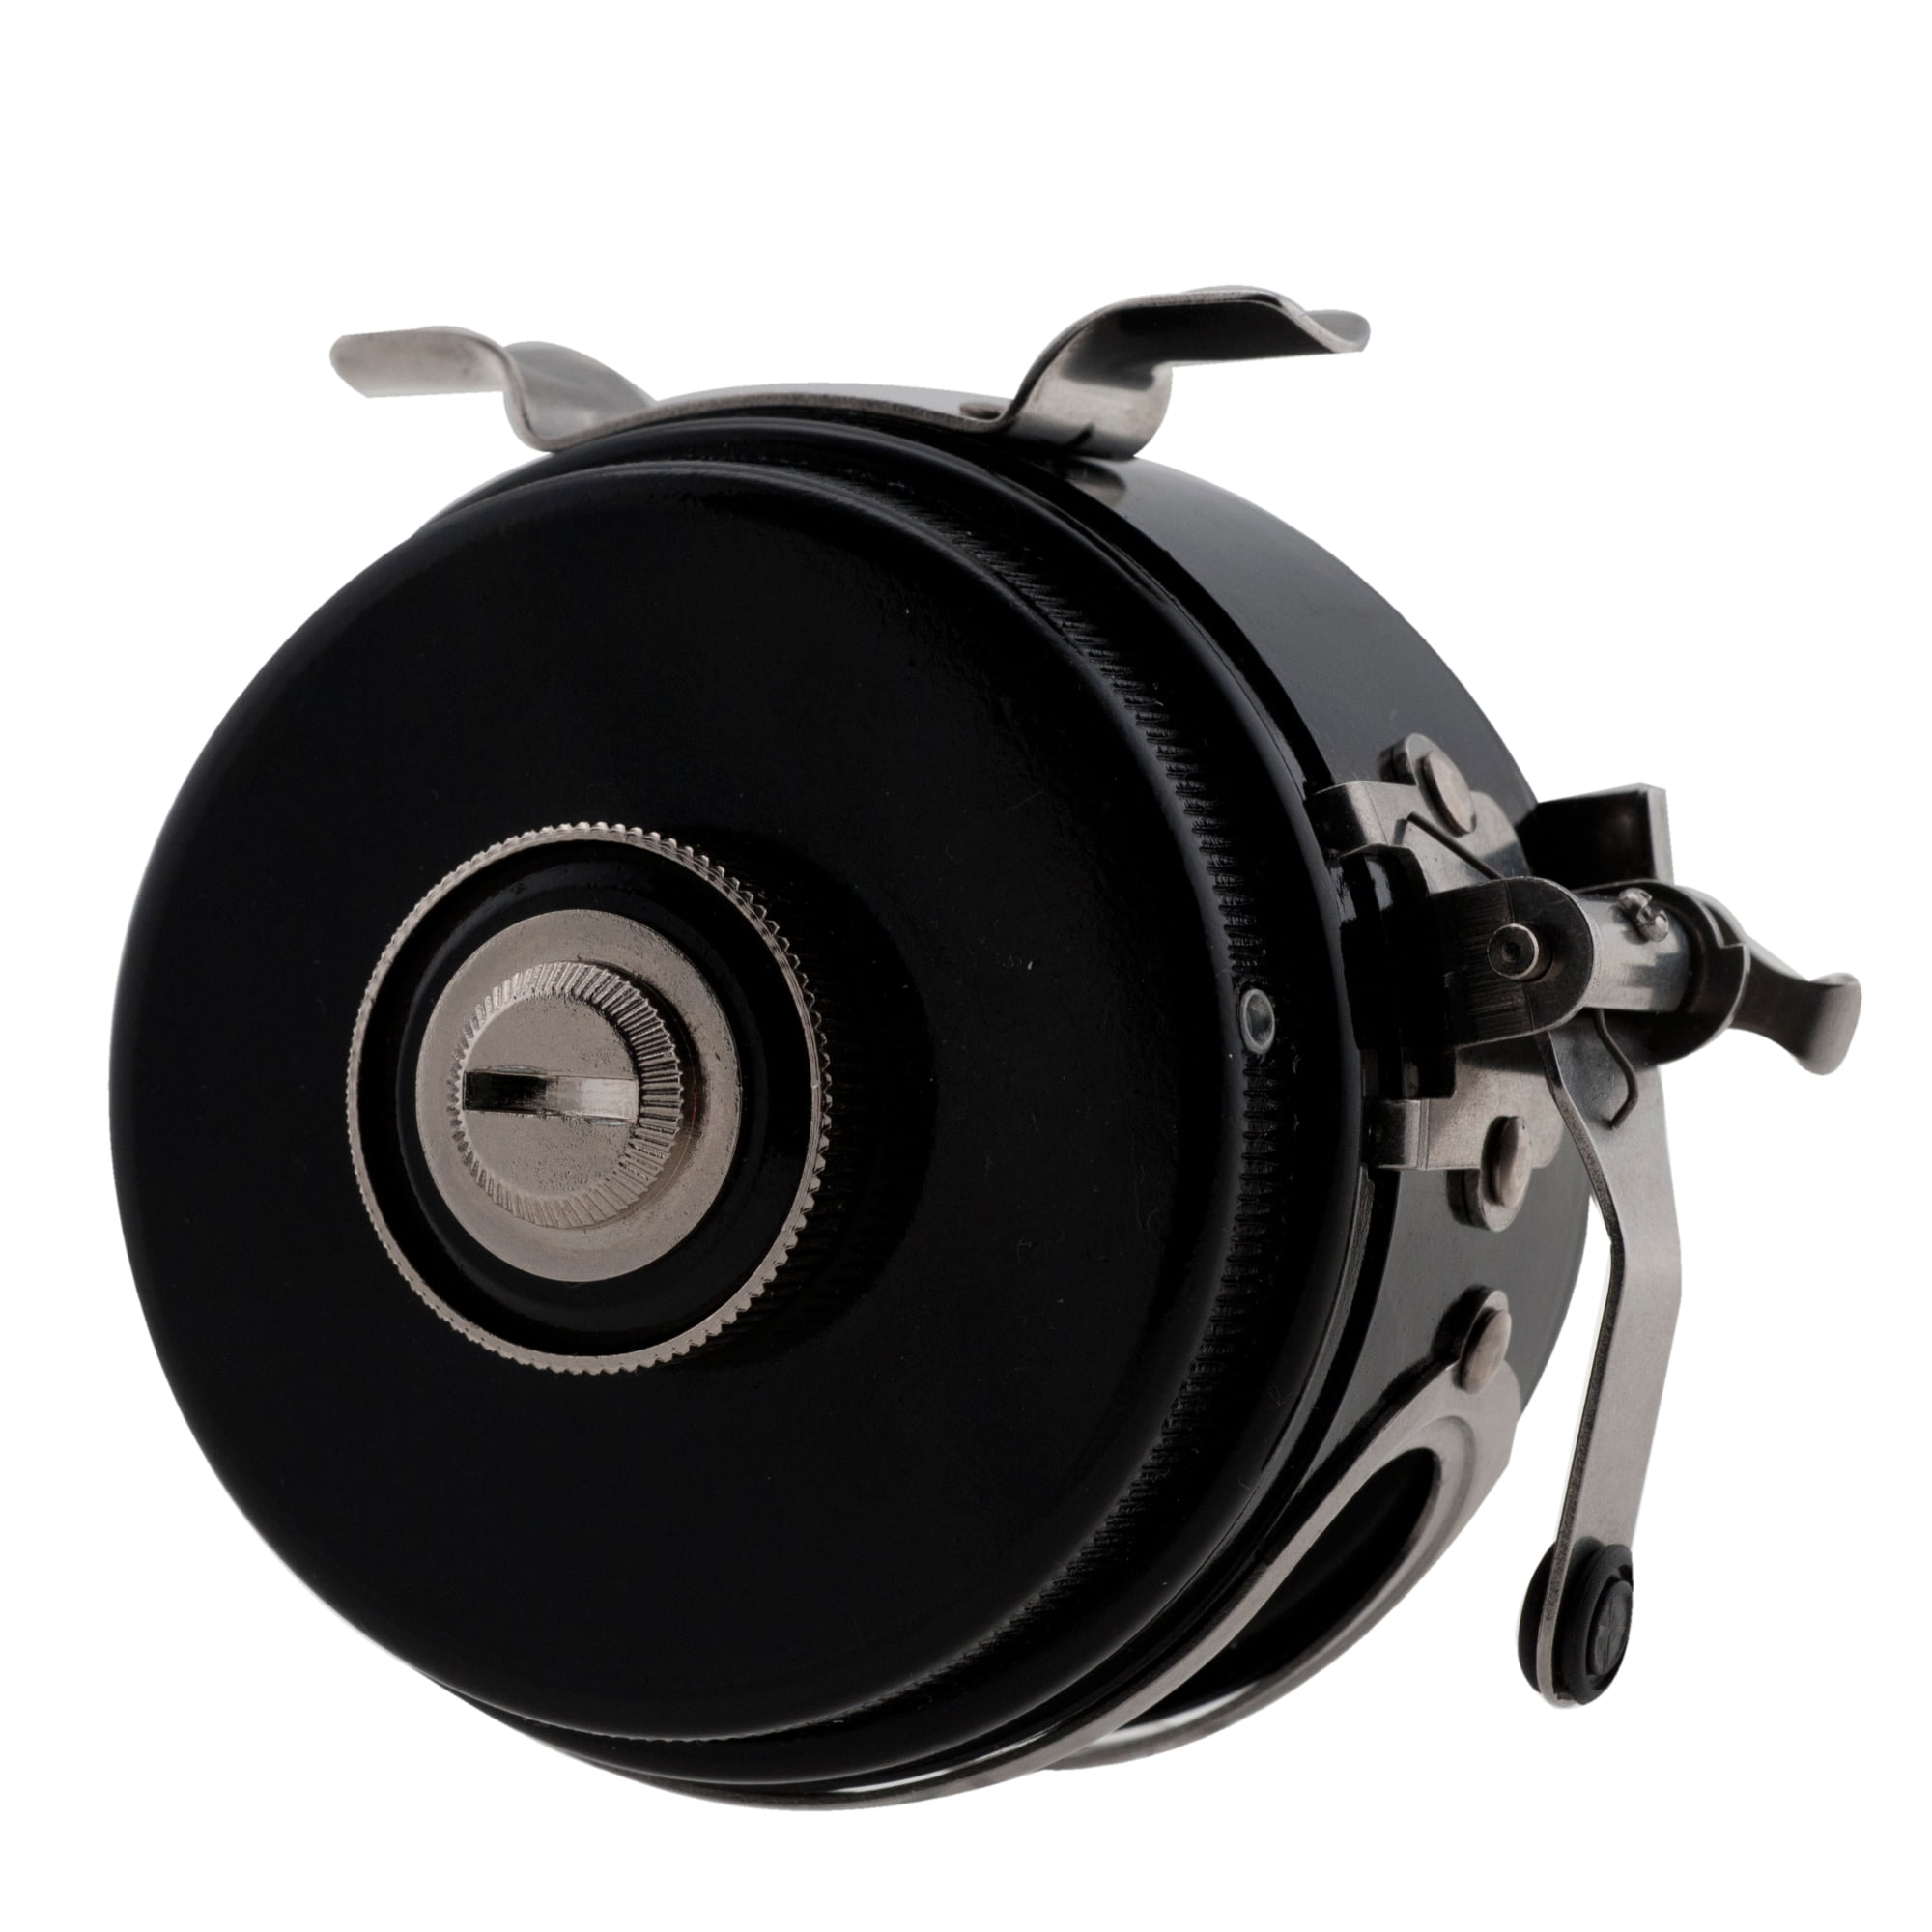 Pflueger Automatic Fly Reel, Size 44385 Fishing Reel 